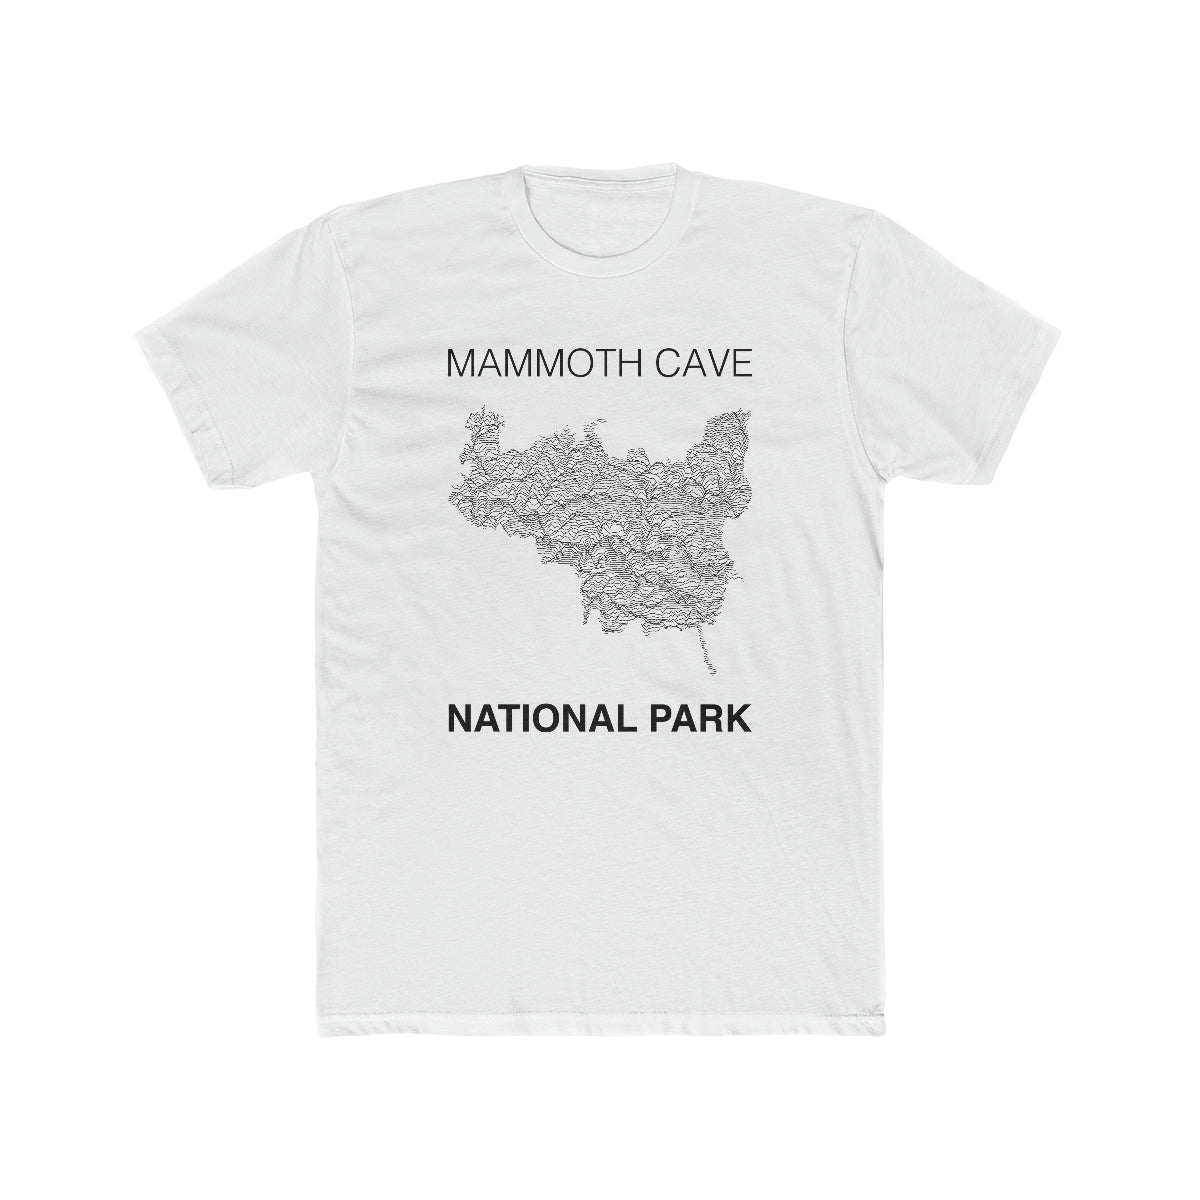 Mammoth Cave National Park T-Shirt Lines